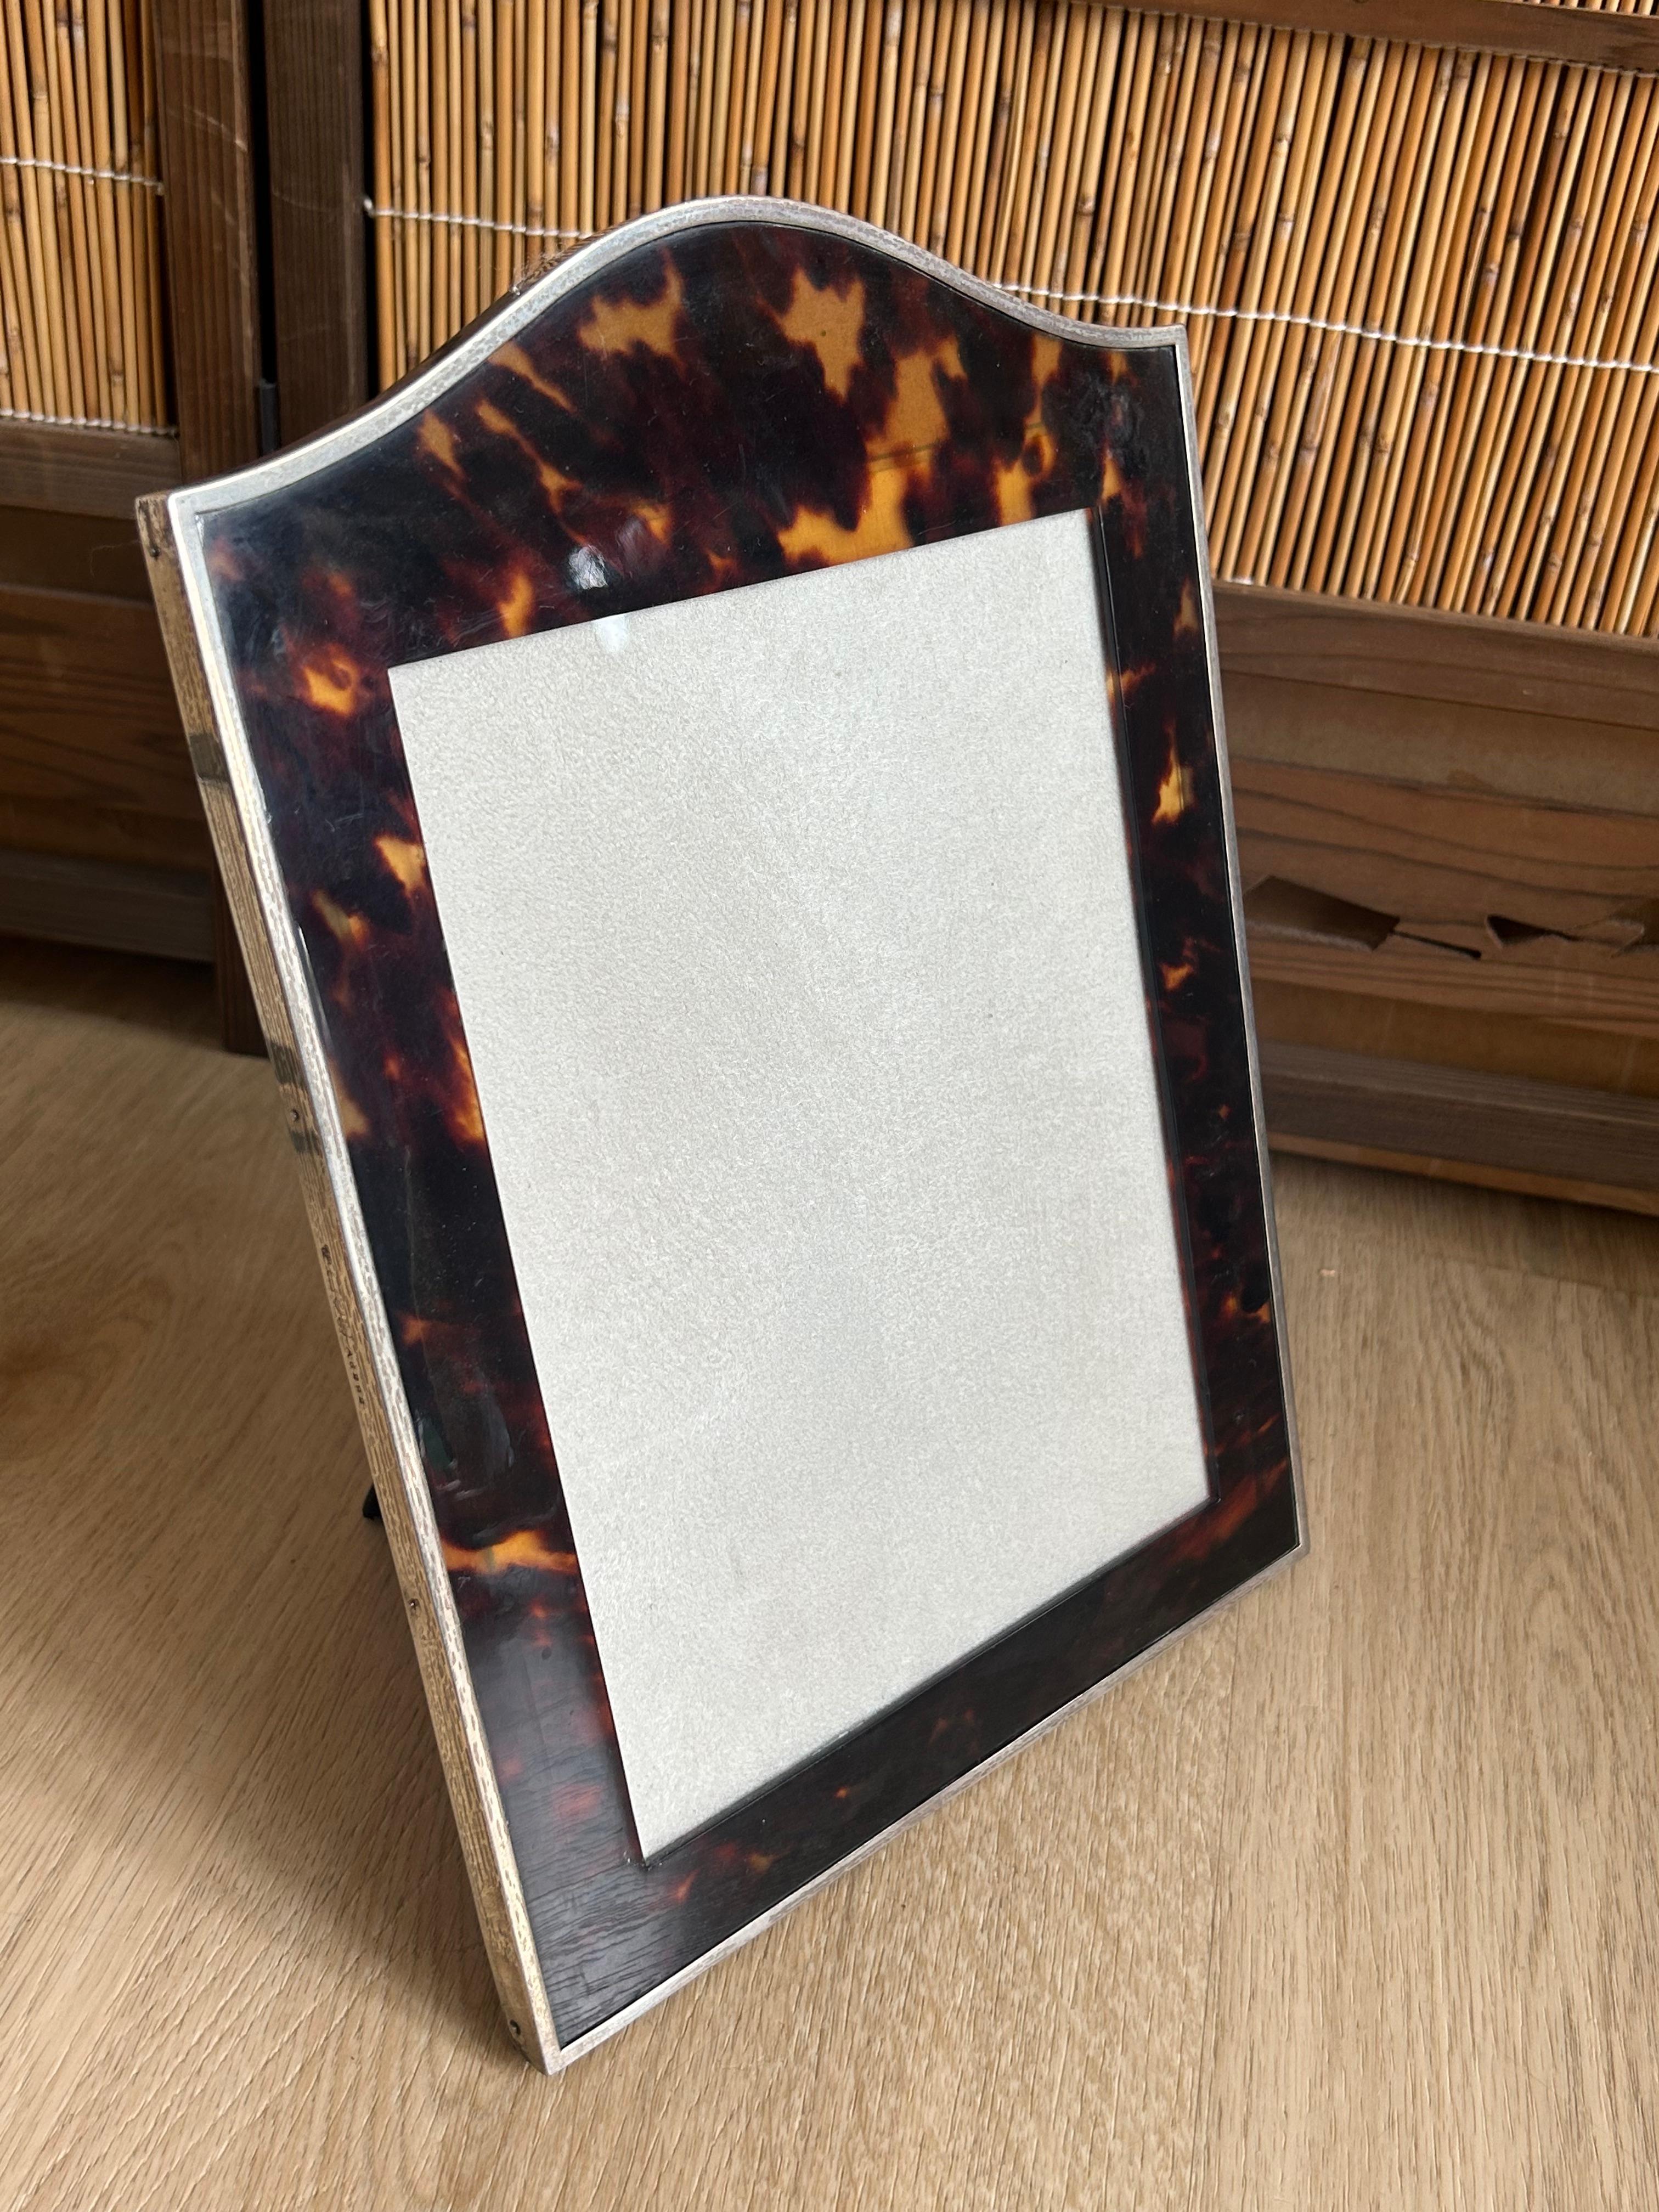 One tortoiseshell Photograph Frames with silver rims and suede backings.
 A Photograph Frame with arched top and silver rim,  black material backs, London 1915, numbered A6292, mark of C&RC for Charles Reynolds & Co,

The pictures are part of the